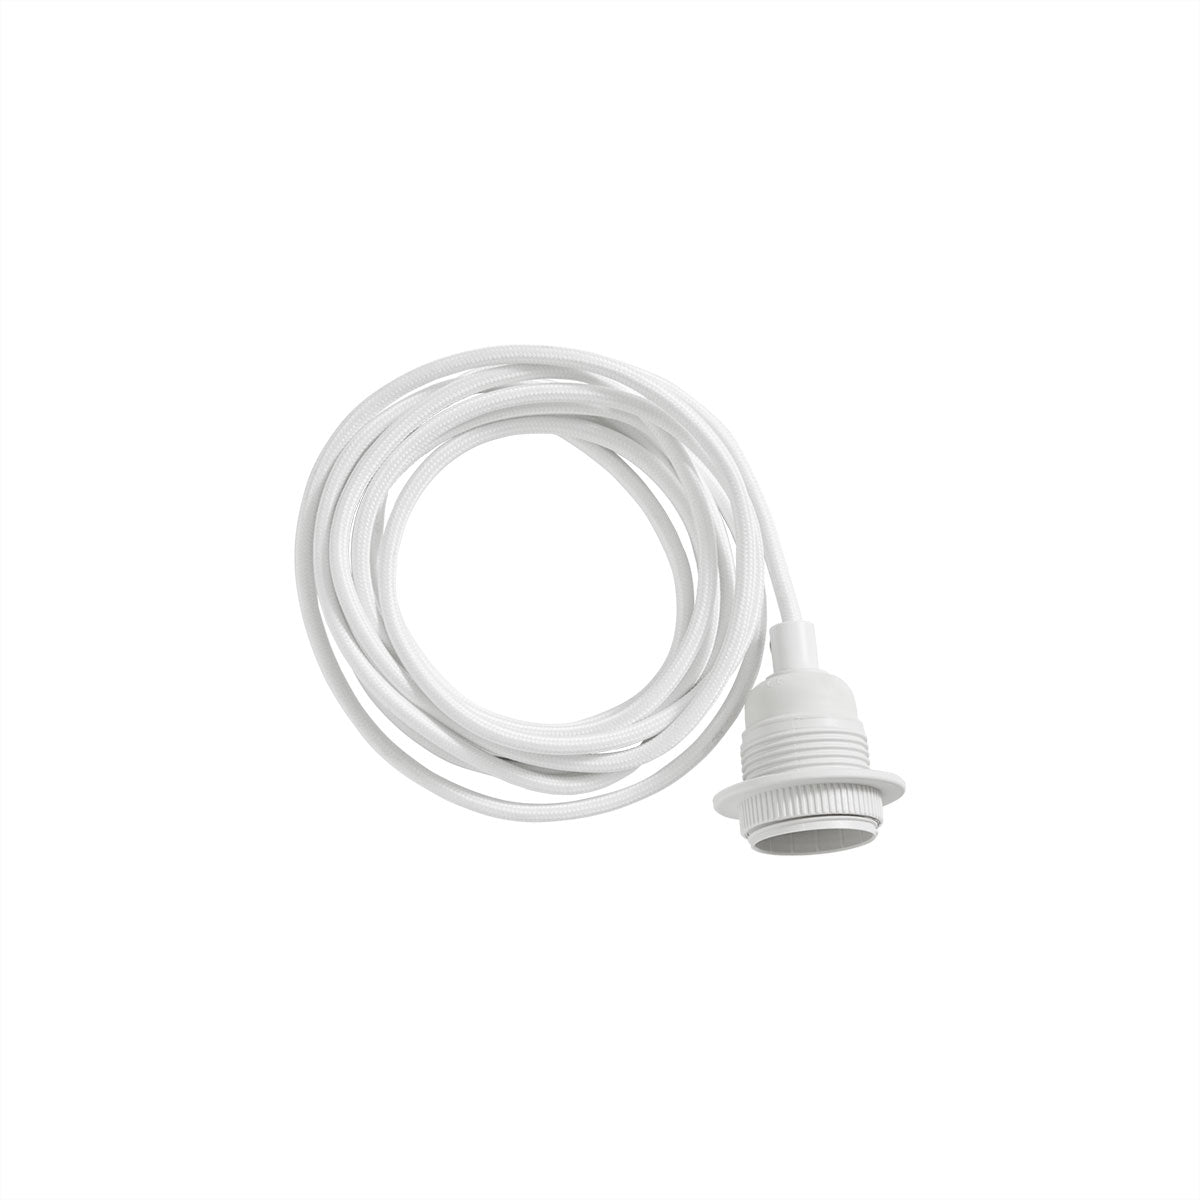 OYOY LIVING Fabric cord with socket Cord 101 White